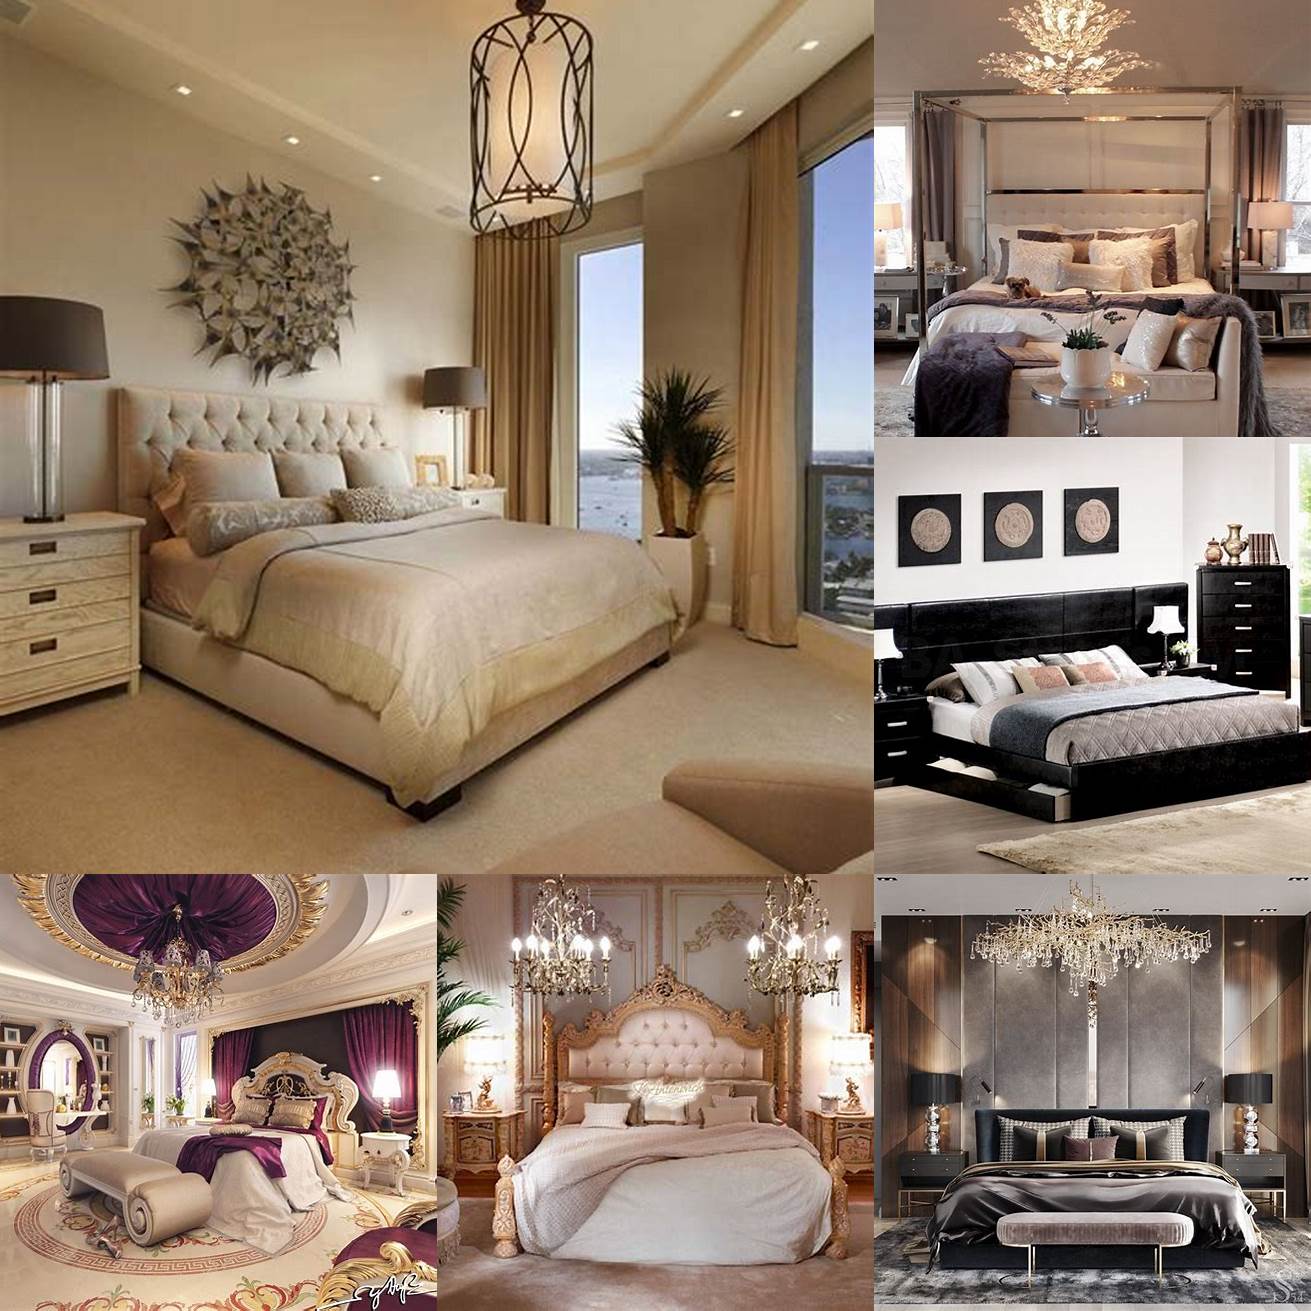 Comfort As mentioned earlier a luxury bedroom set should not only be visually appealing but also comfortable Investing in a set that prioritizes comfort can improve the quality of your sleep and overall well-being